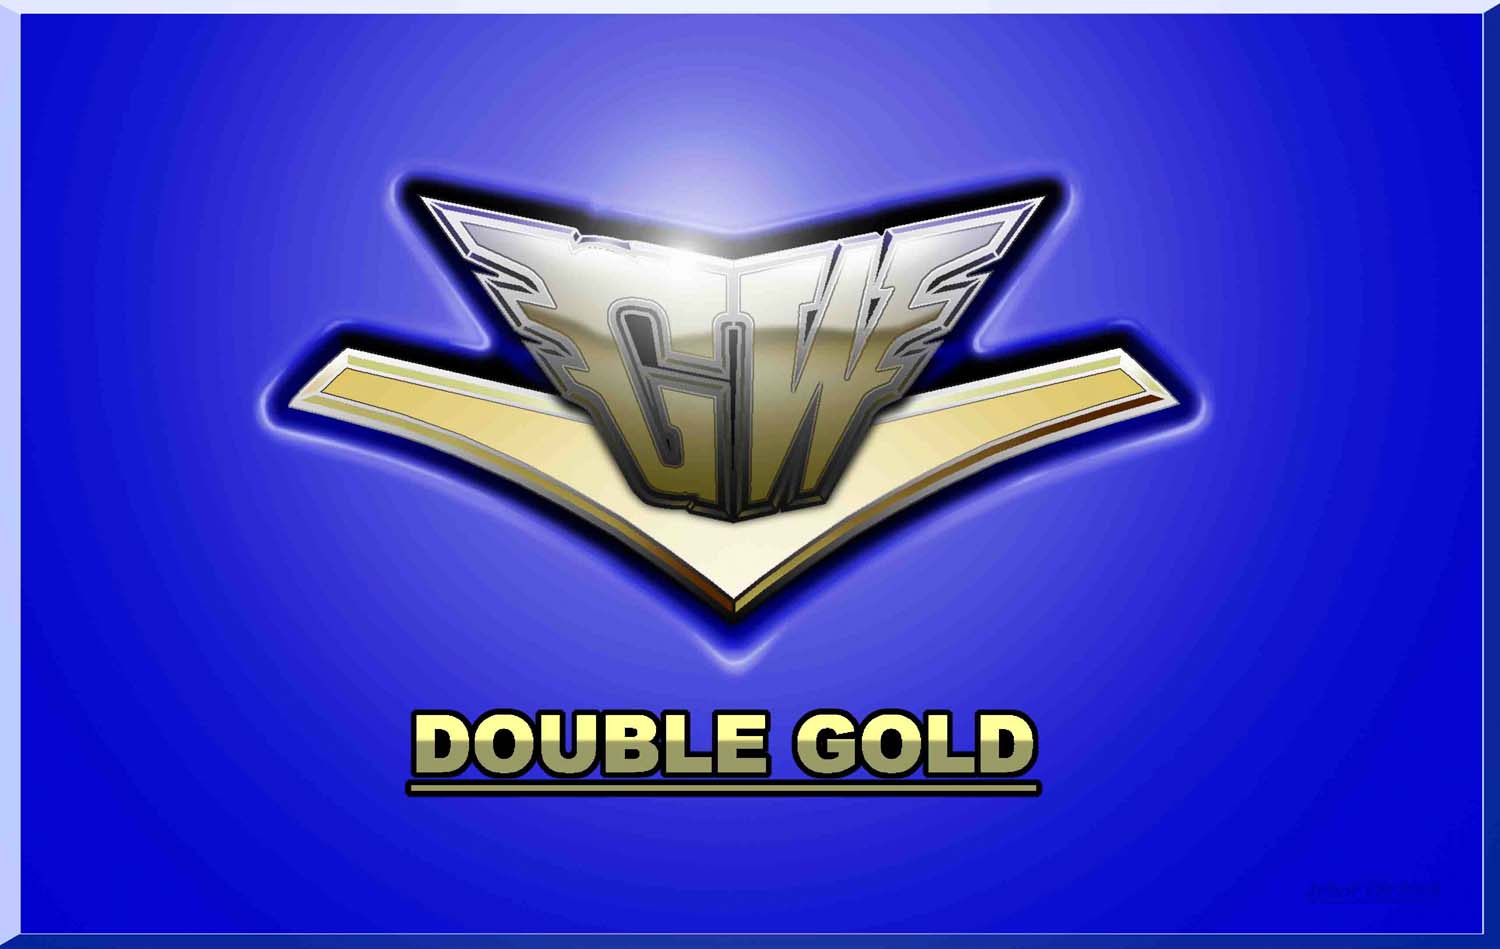 DOUBLE GOLD